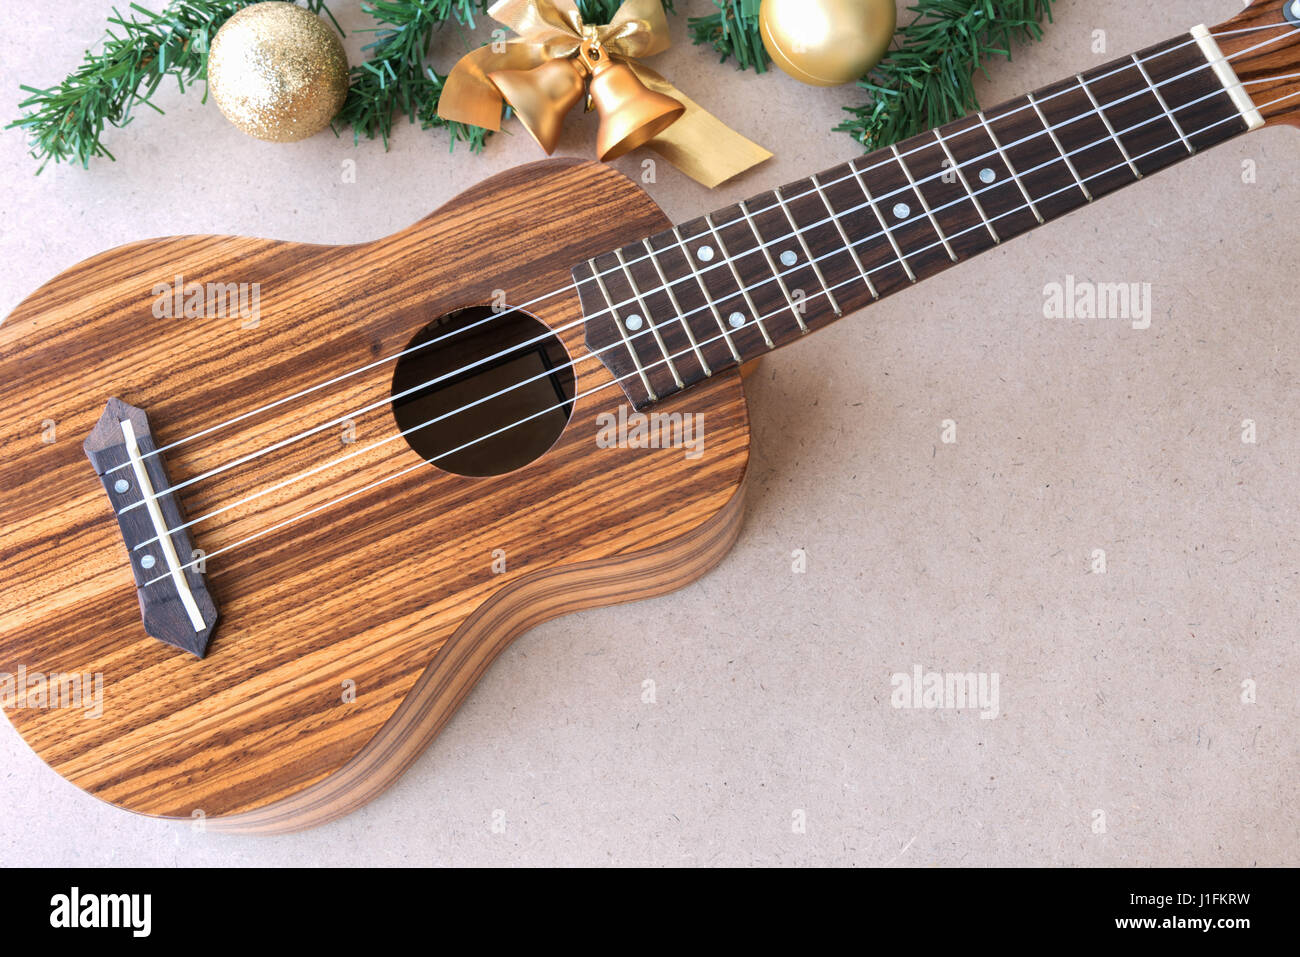 The Ukulele On The Wooden Table With Christmas Golden Decoration Ukulele Is A Gift From The Christmas Day Stock Photo Alamy